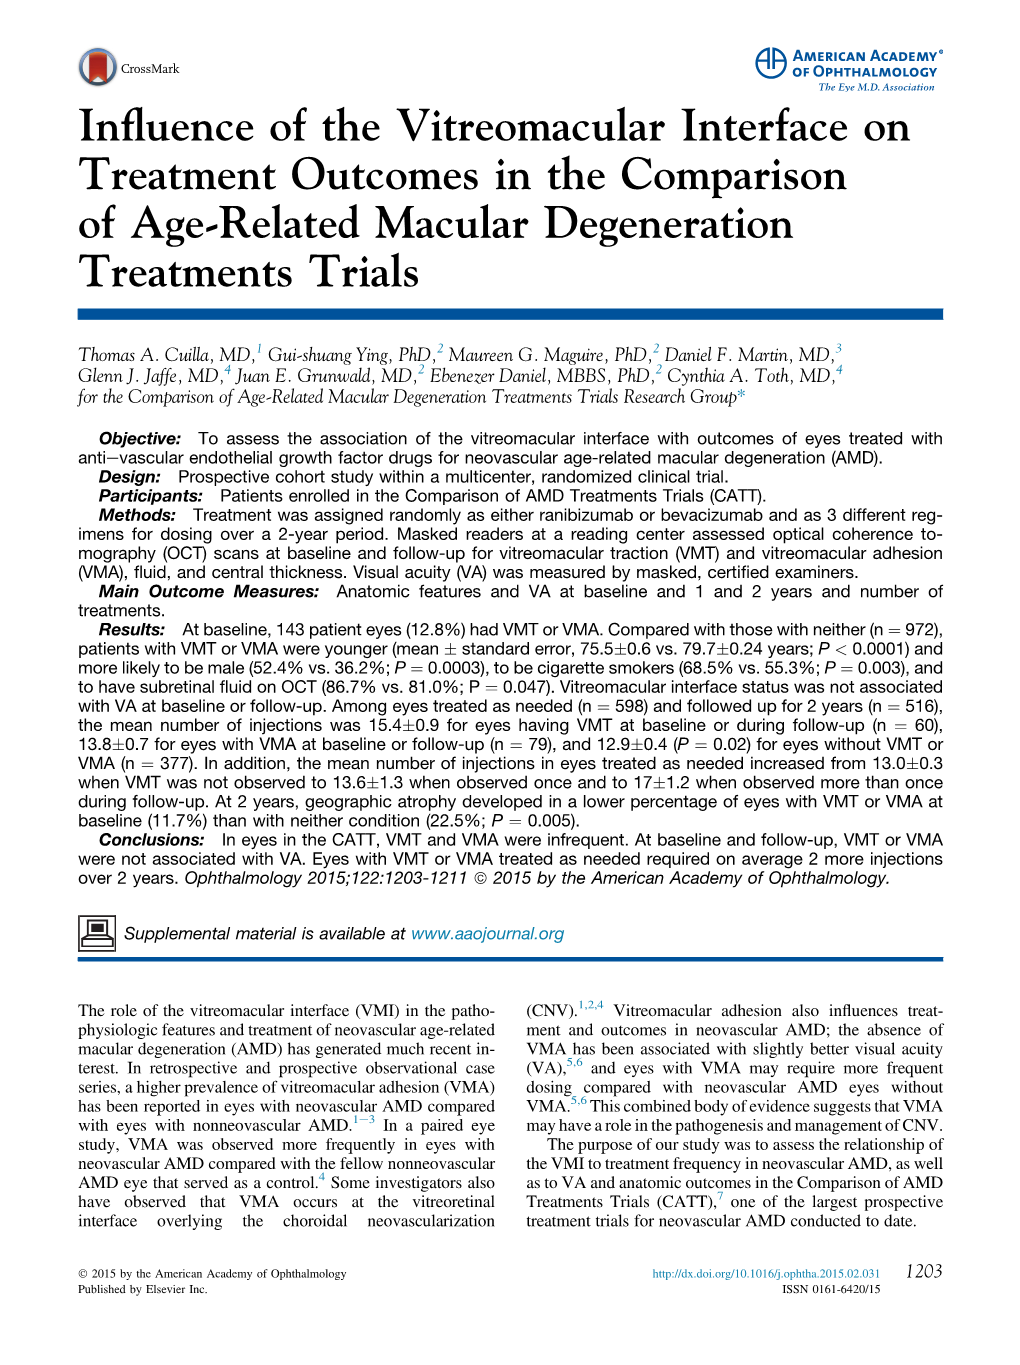 Age-Related Macular Degeneration Treatments Trials